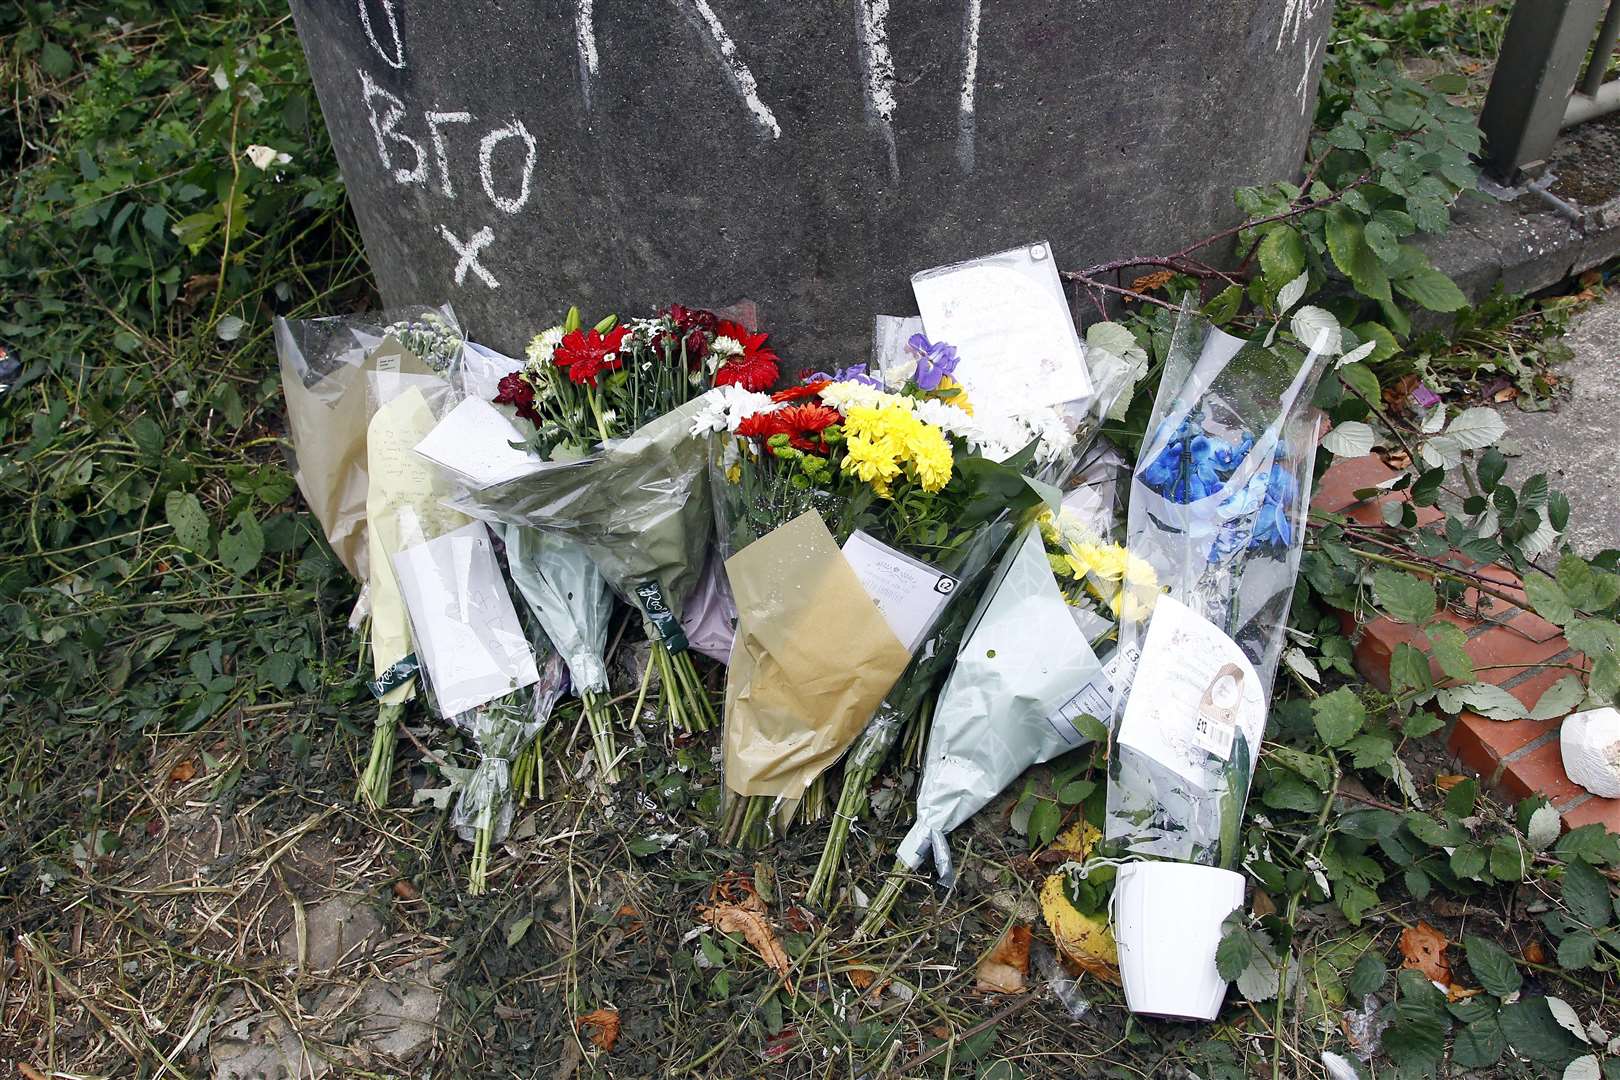 Flower tributes left near the place where Peter was found